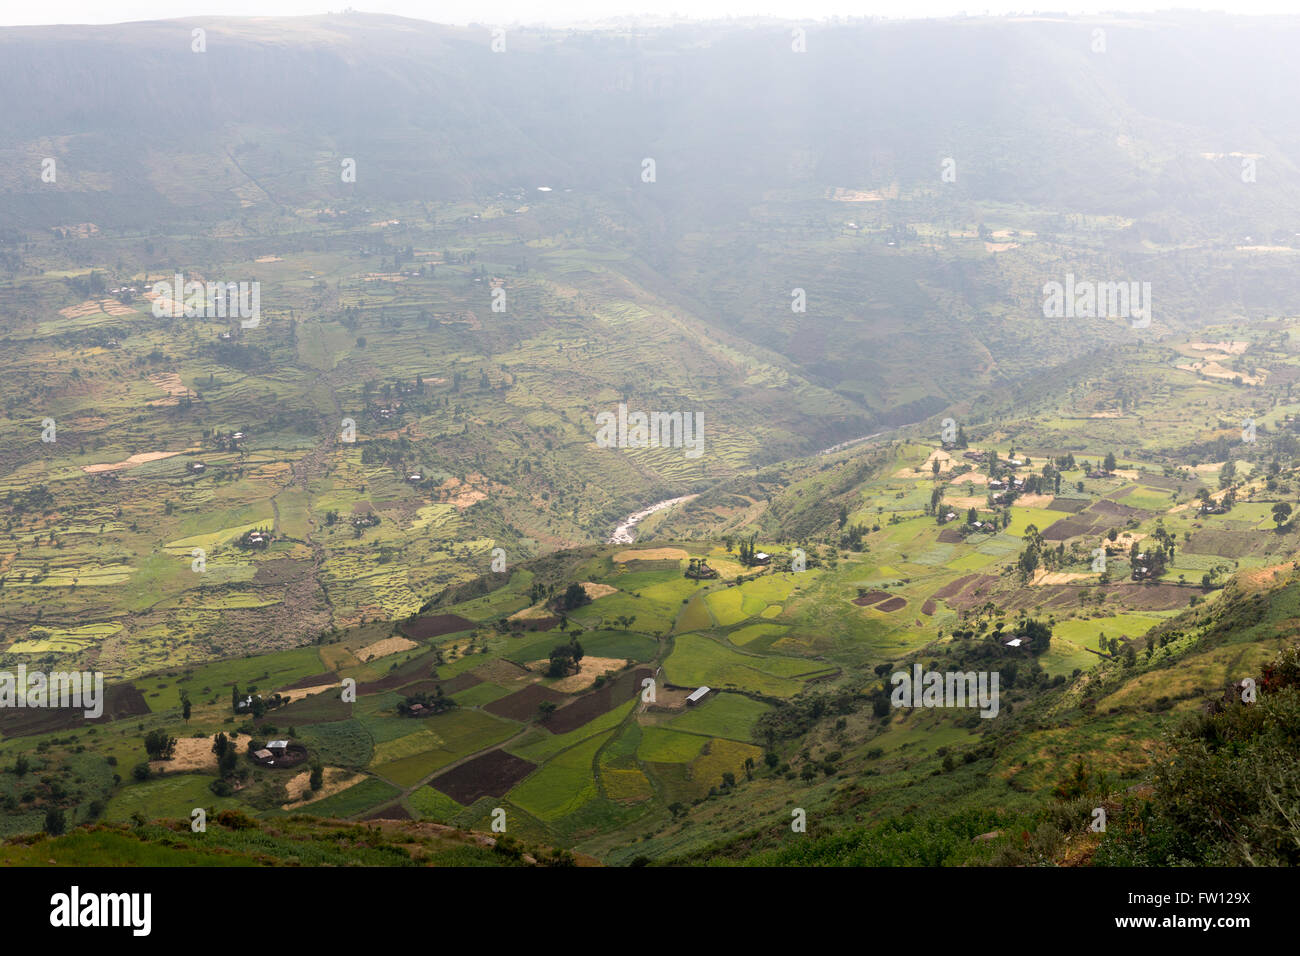 North Shewe, Amhara, Ethiopia, October 2013: Intensively cultivated hillsides of the Berese river valley.  . Stock Photo